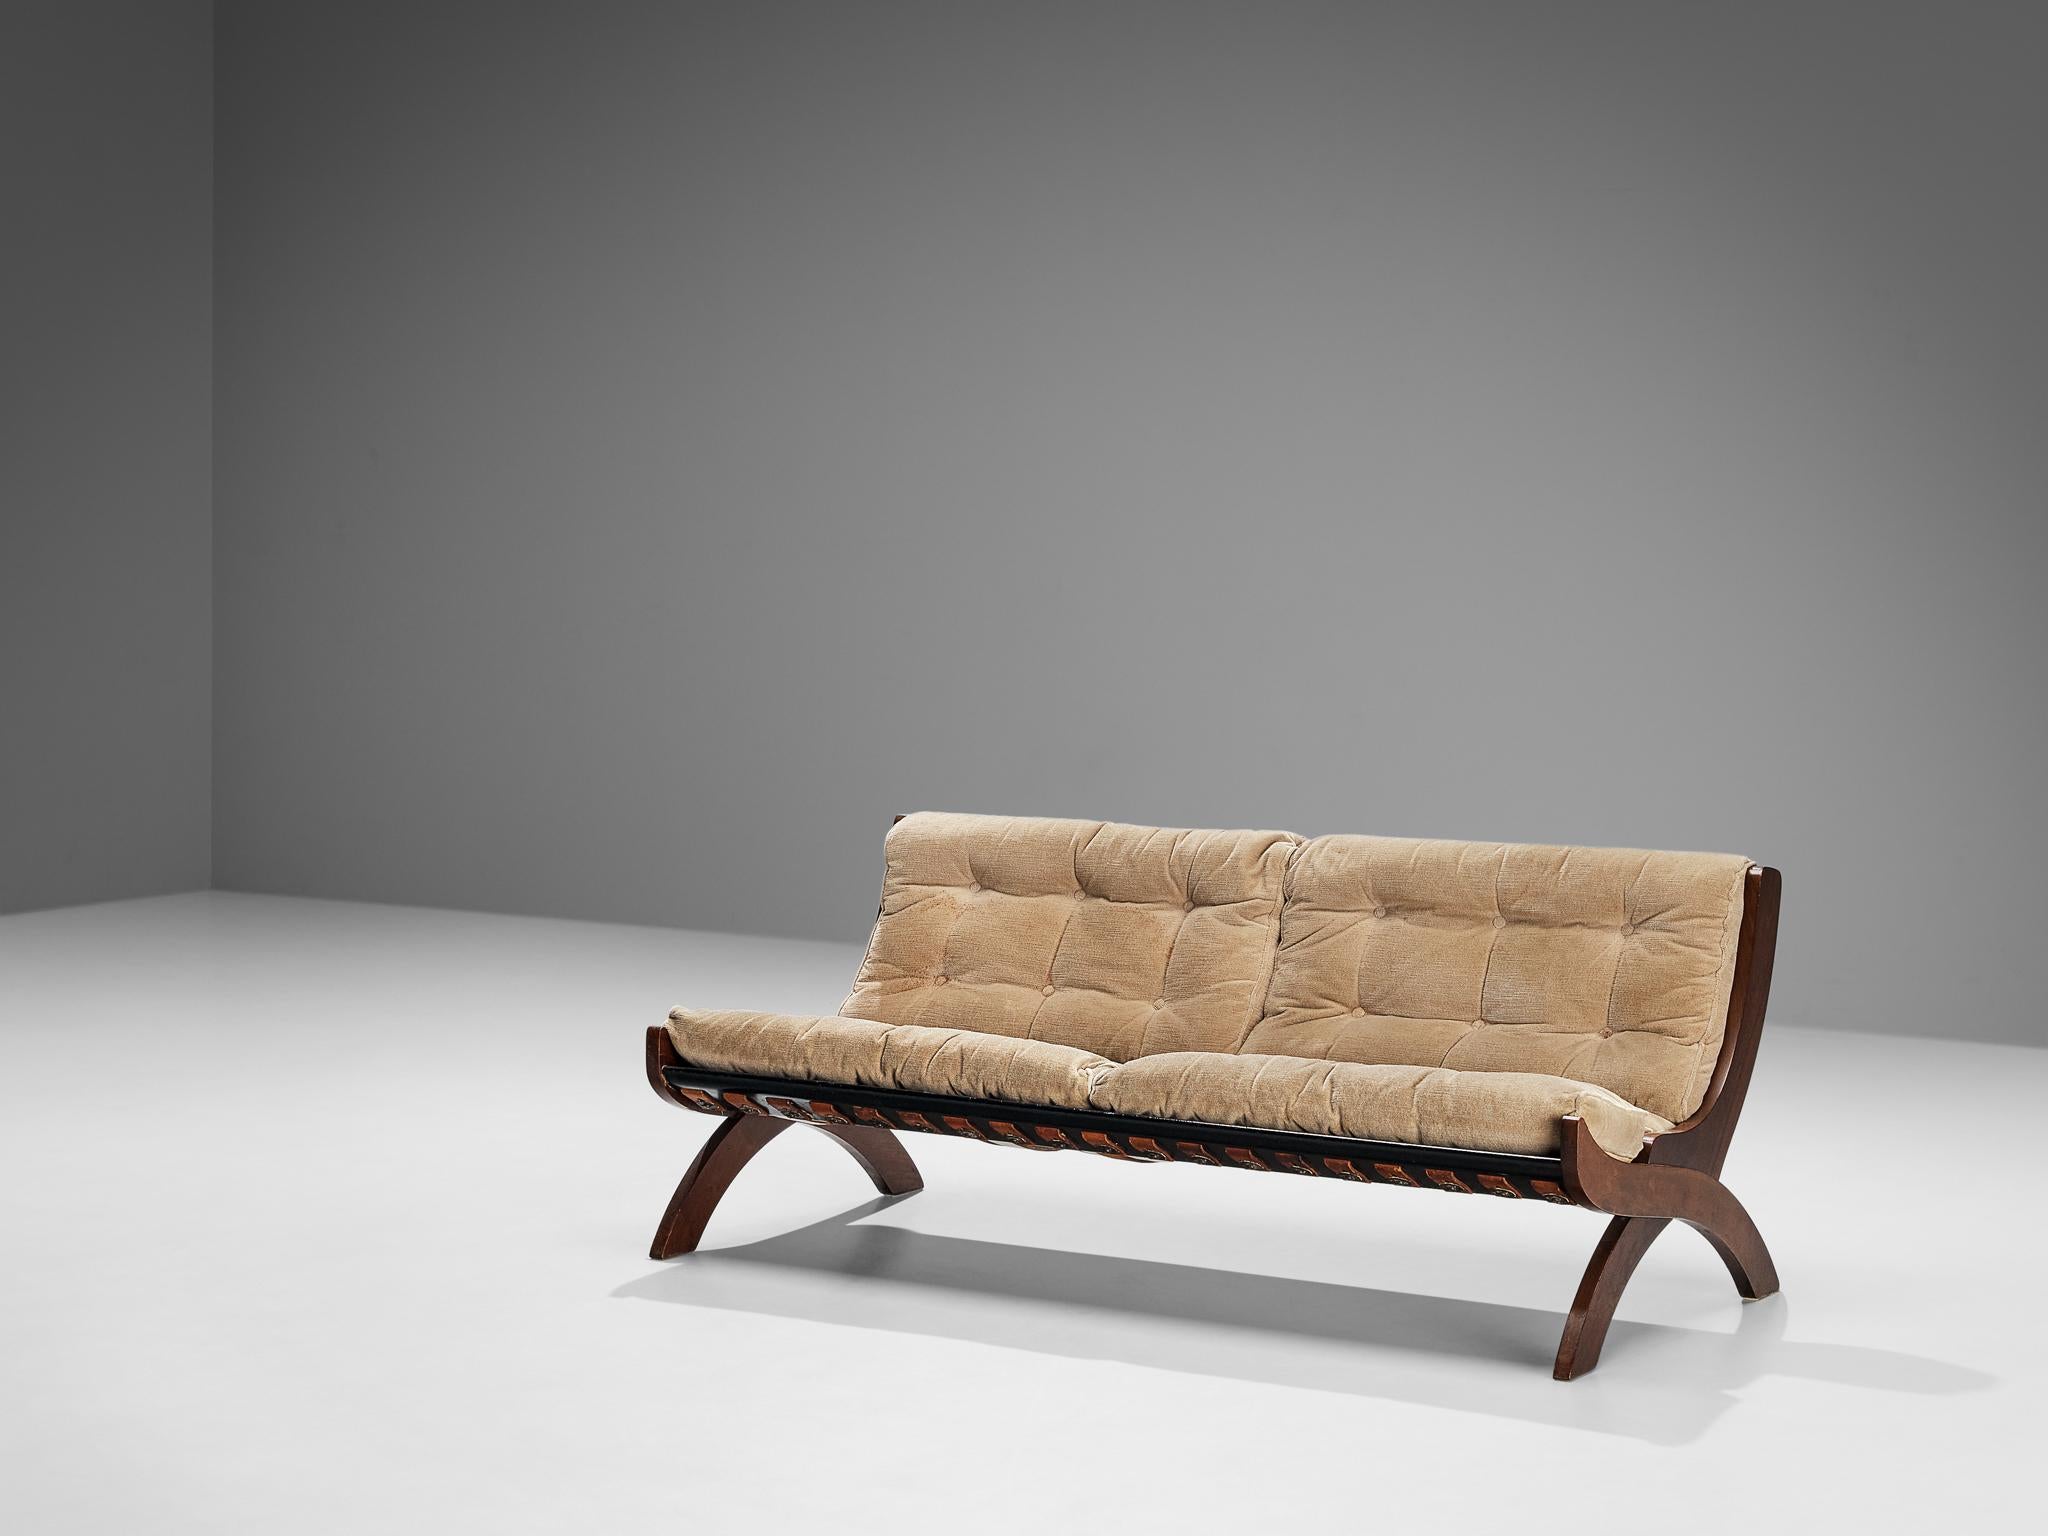 Leather MarCo Comolli 'CP1' Sofa in Mahogany and Beige Corduroy